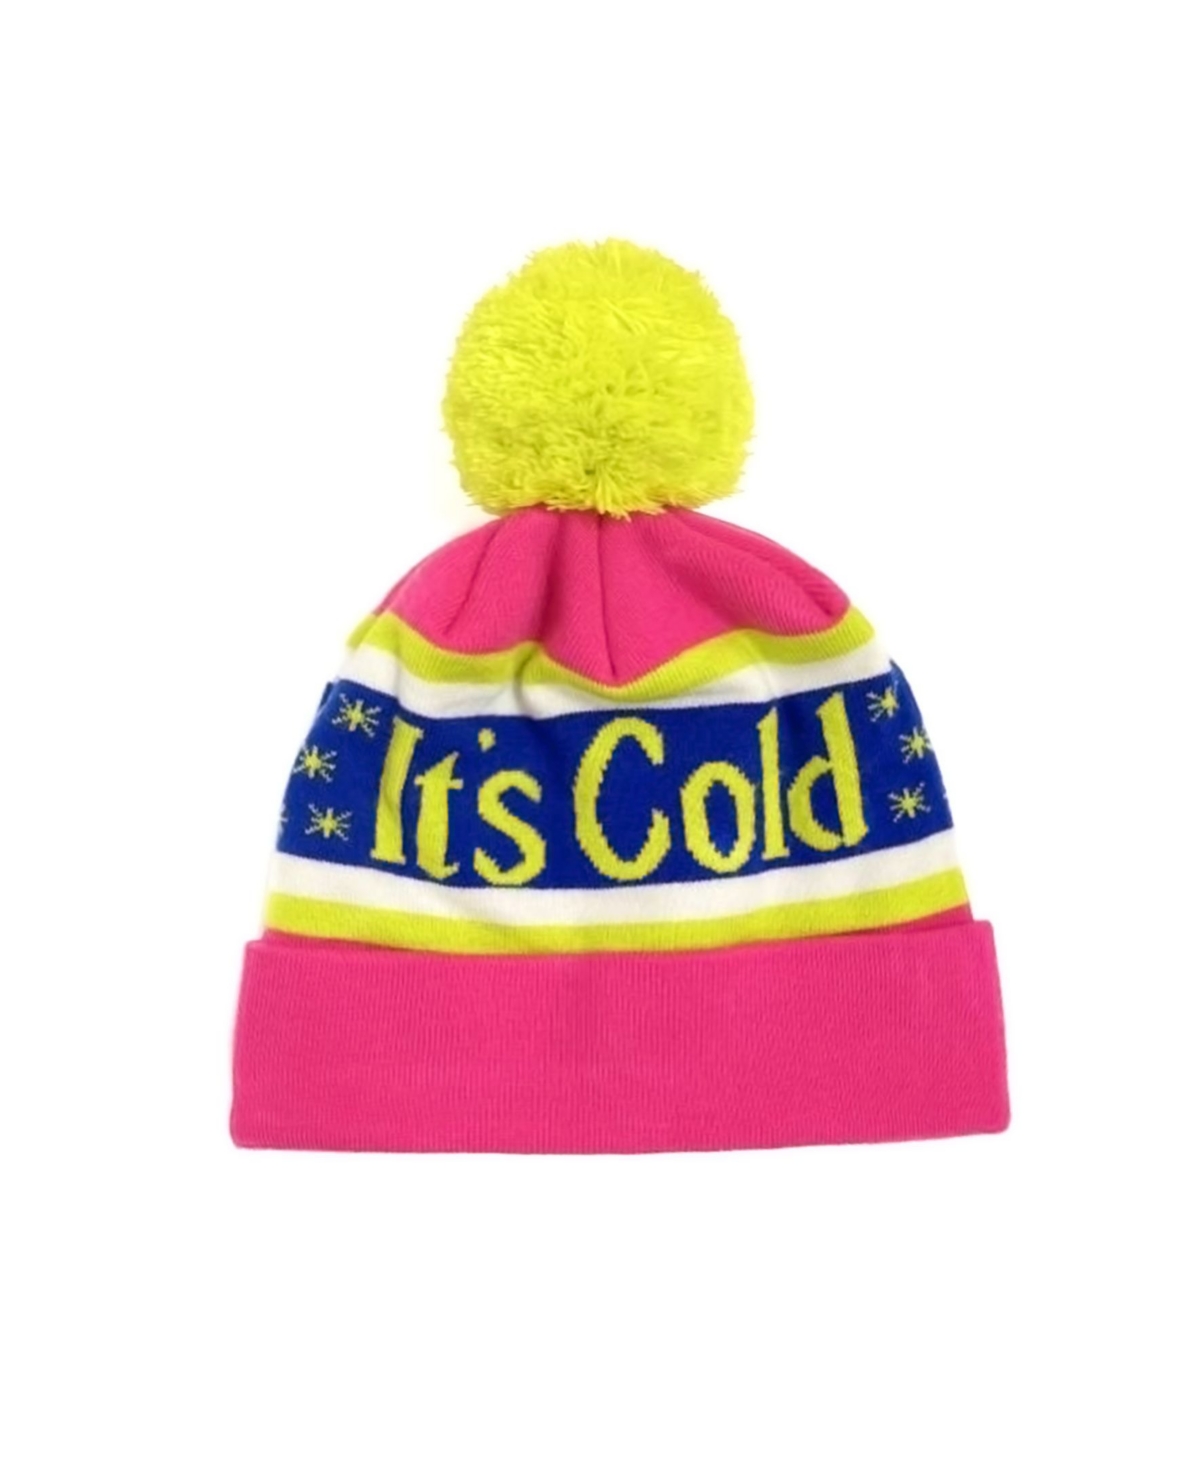 Women's Cold Lady Winter Hats - Pink, Neon Yellow